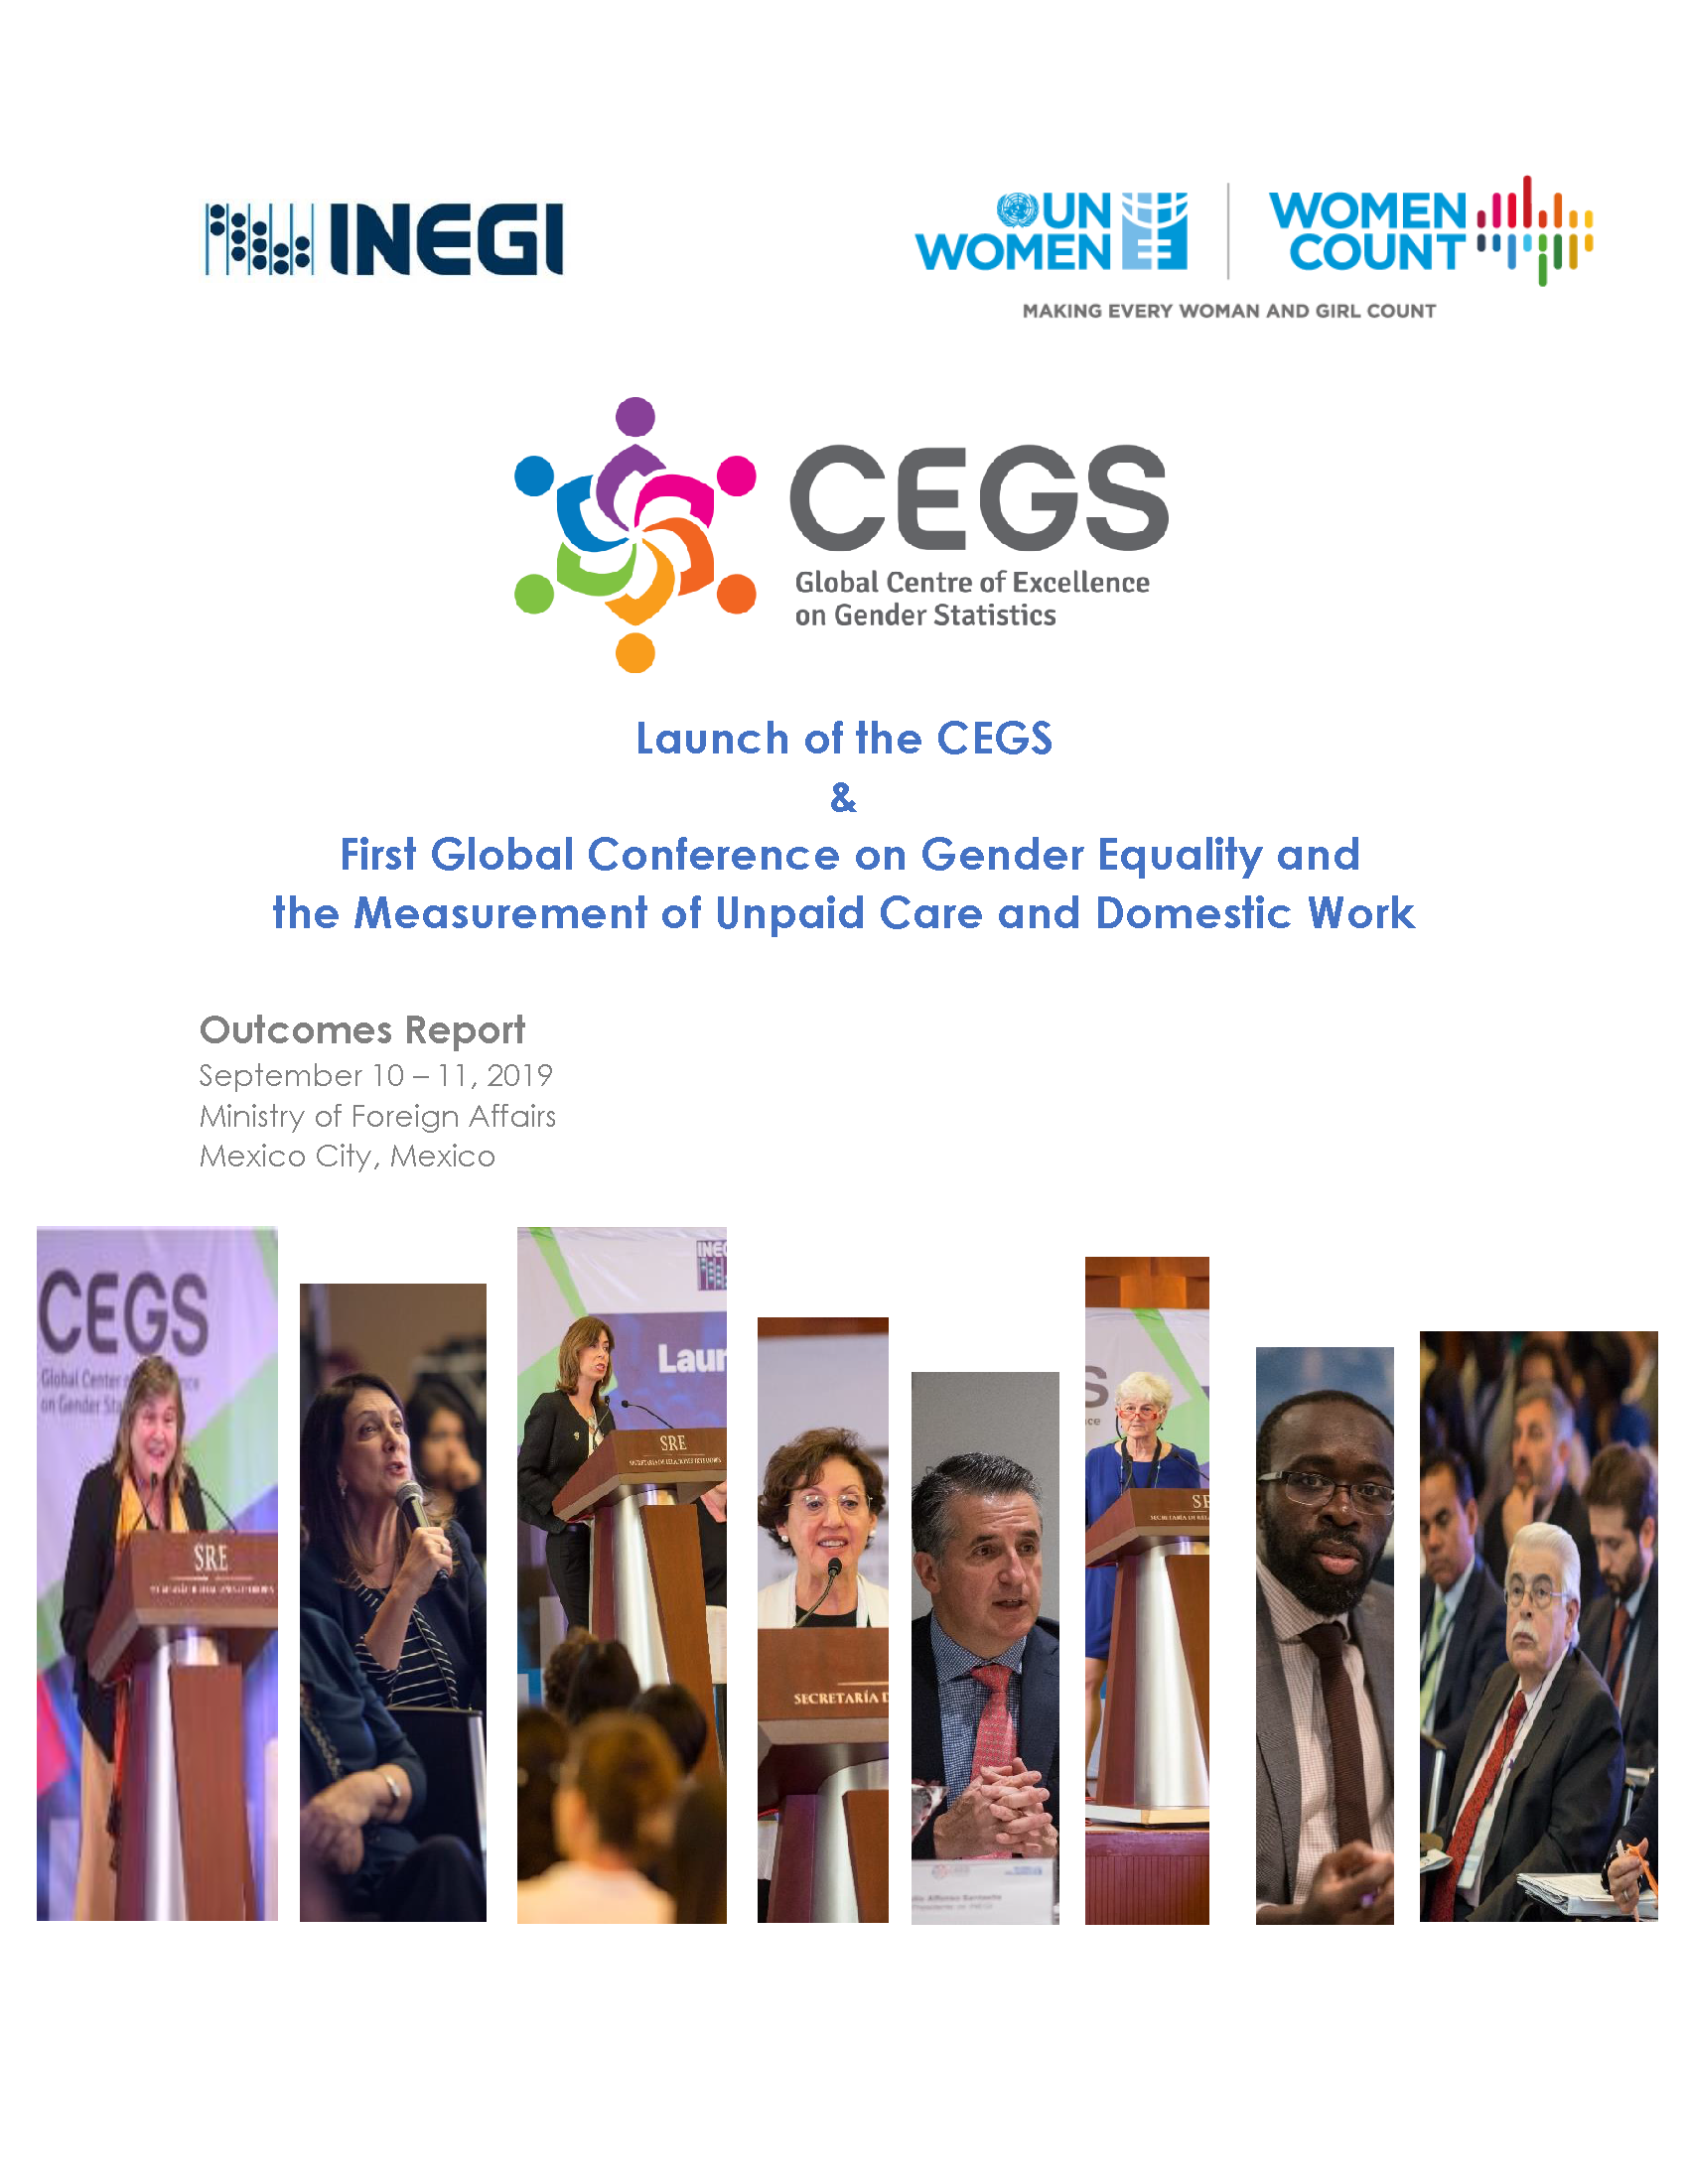 Outcome Report: CEGS Launch and First Global Conference on Gender Equality and the Measurement of Unpaid Care and Domestic Work